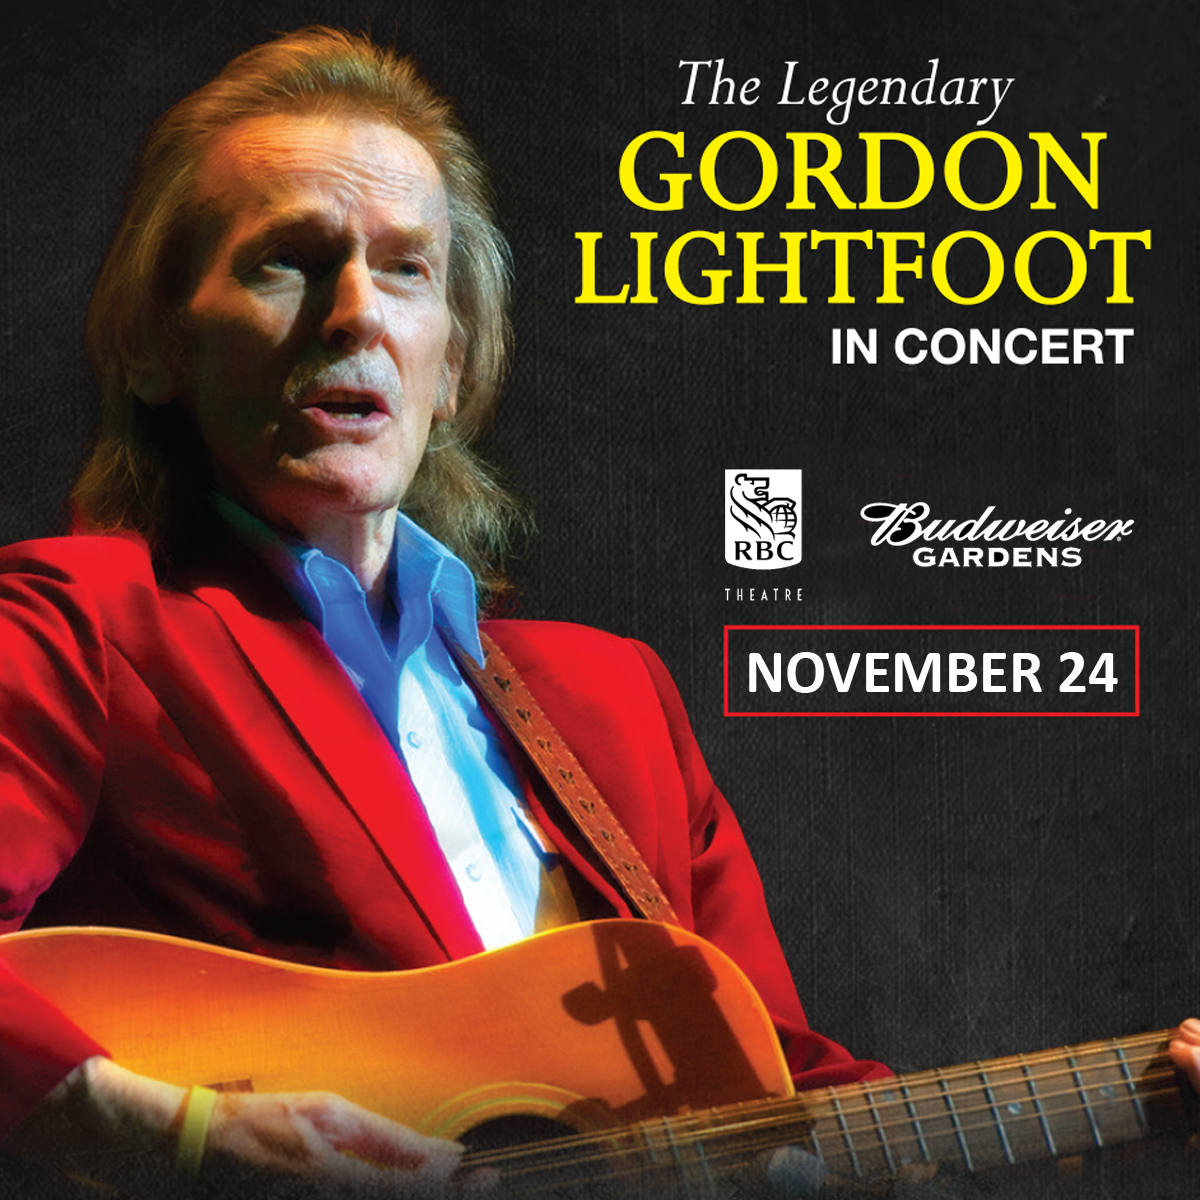 Enter to win Gordon Lightfoot Tickets GlobalNews Contests & Sweepstakes